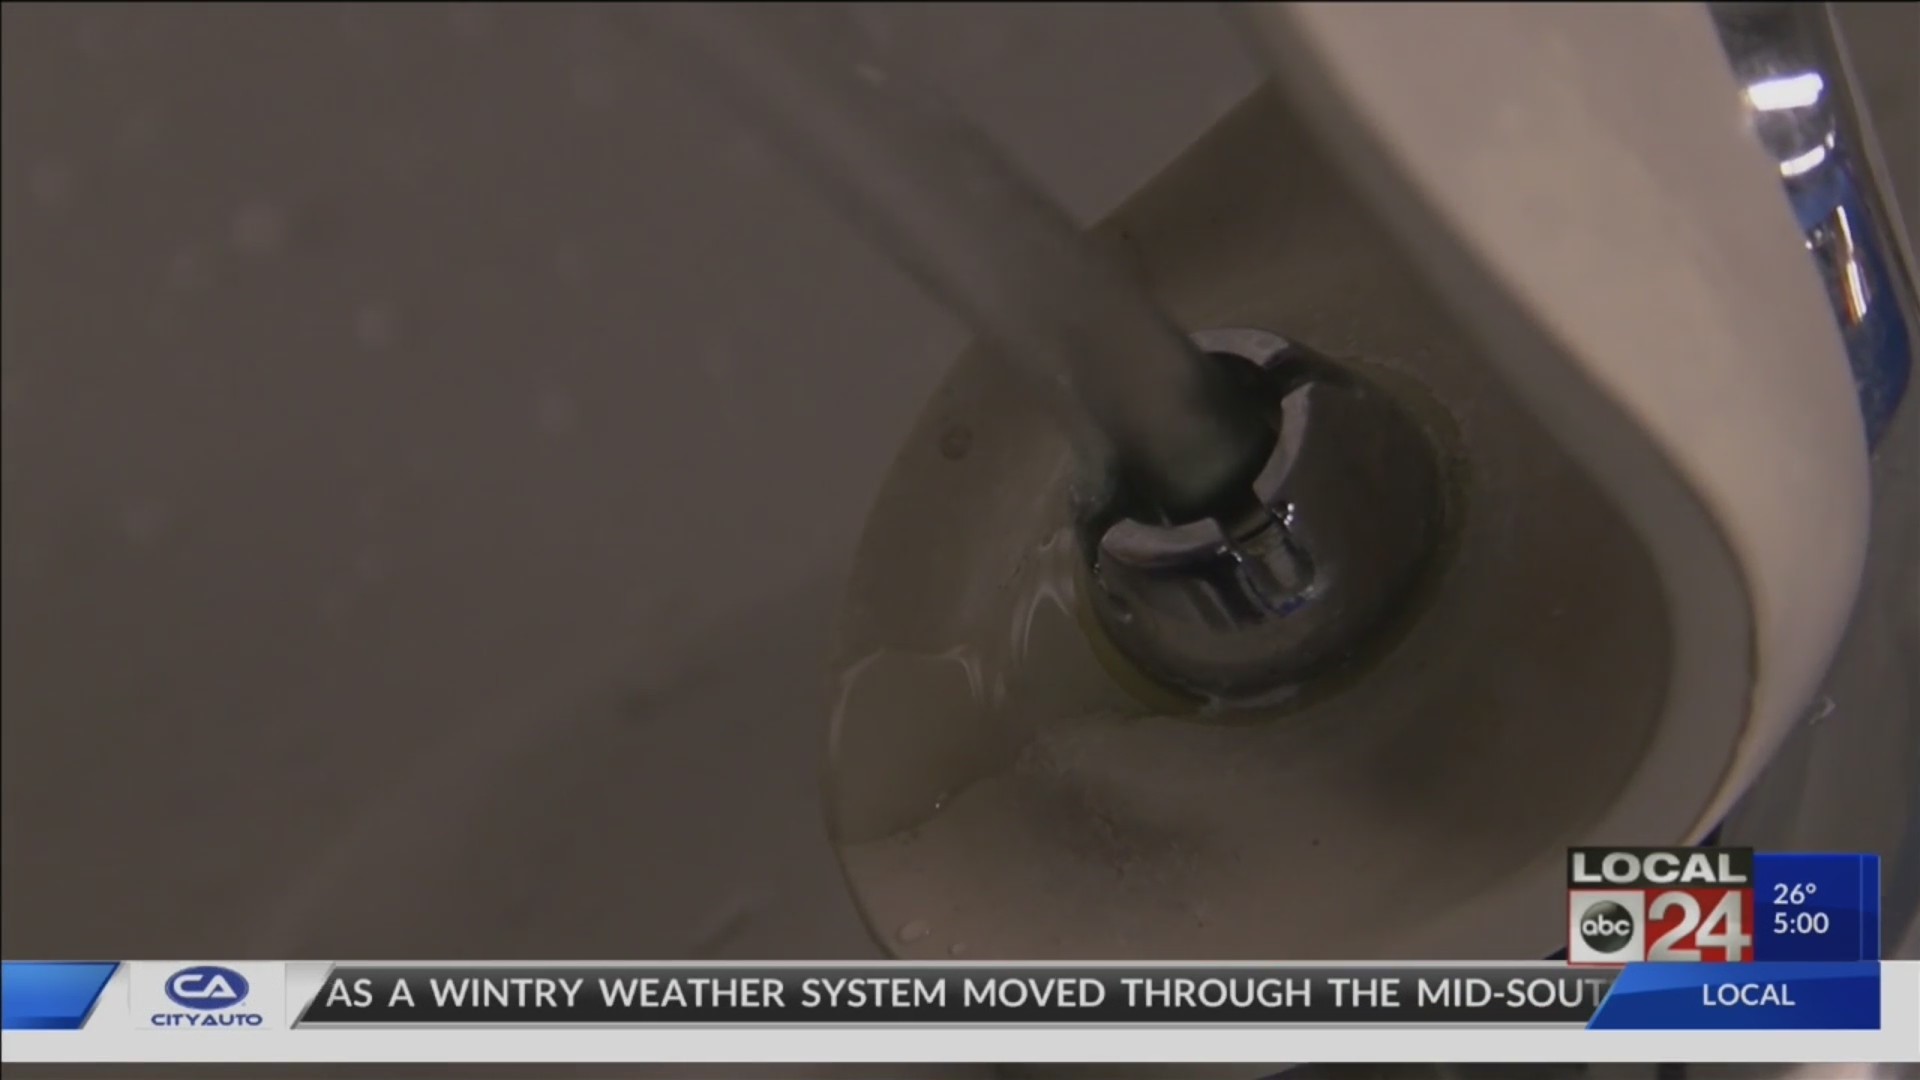 Shelby County Schools says latest testing results show unsafe lead levels at 35 schools total